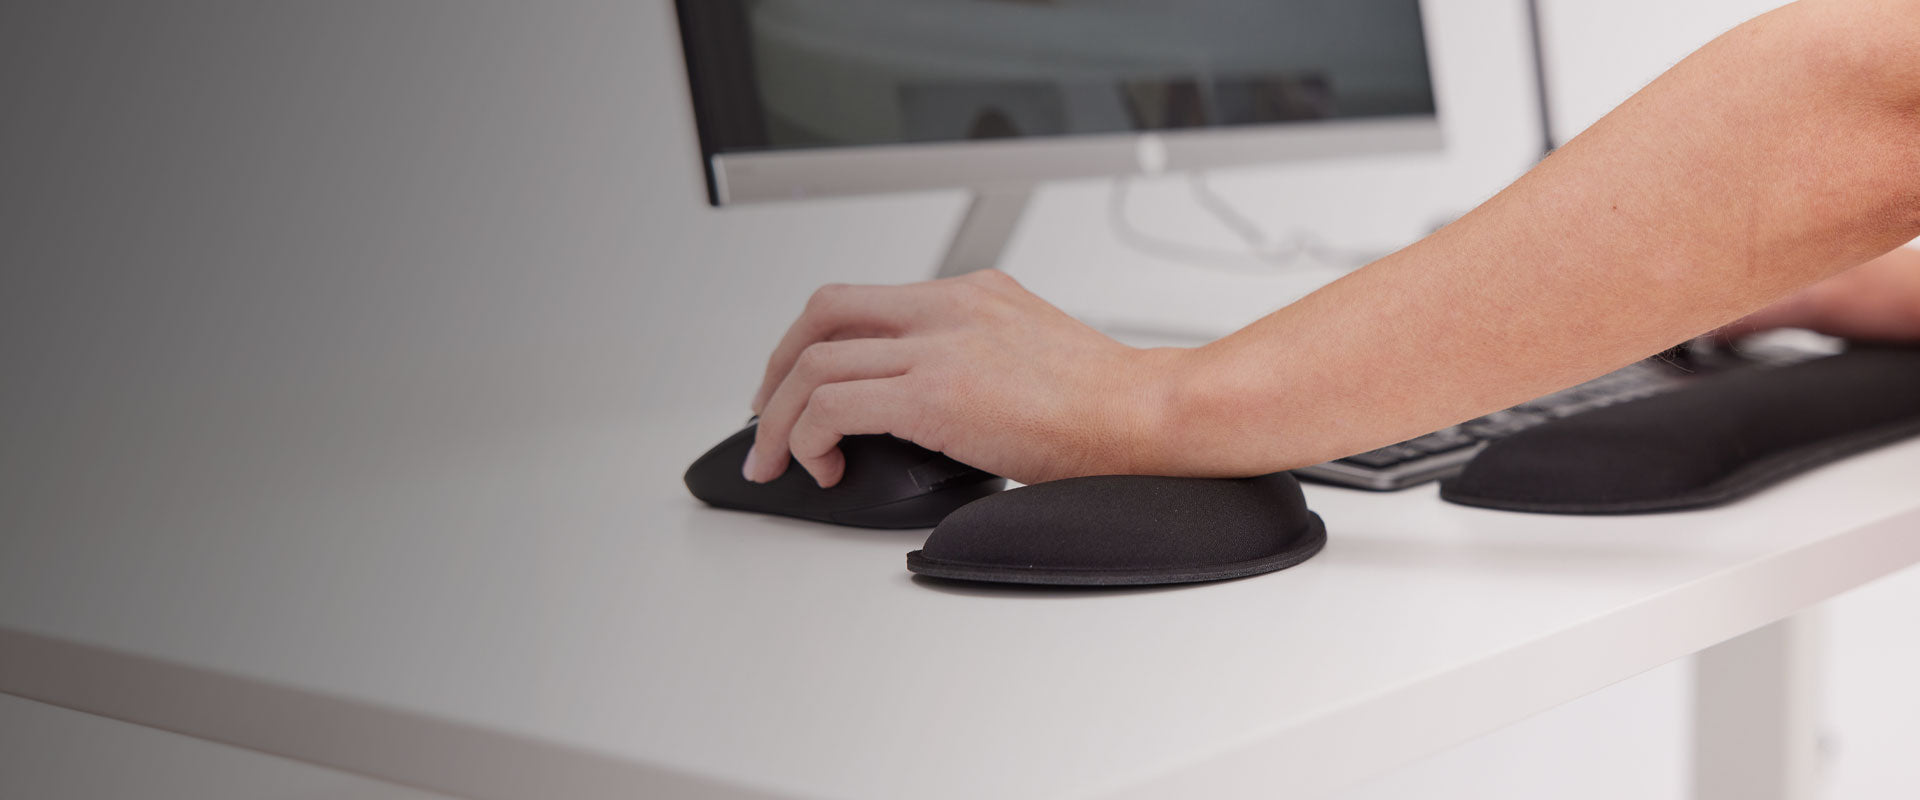 A hand uses a mouse on a Gorilla Grip wrist set for comfortable computing